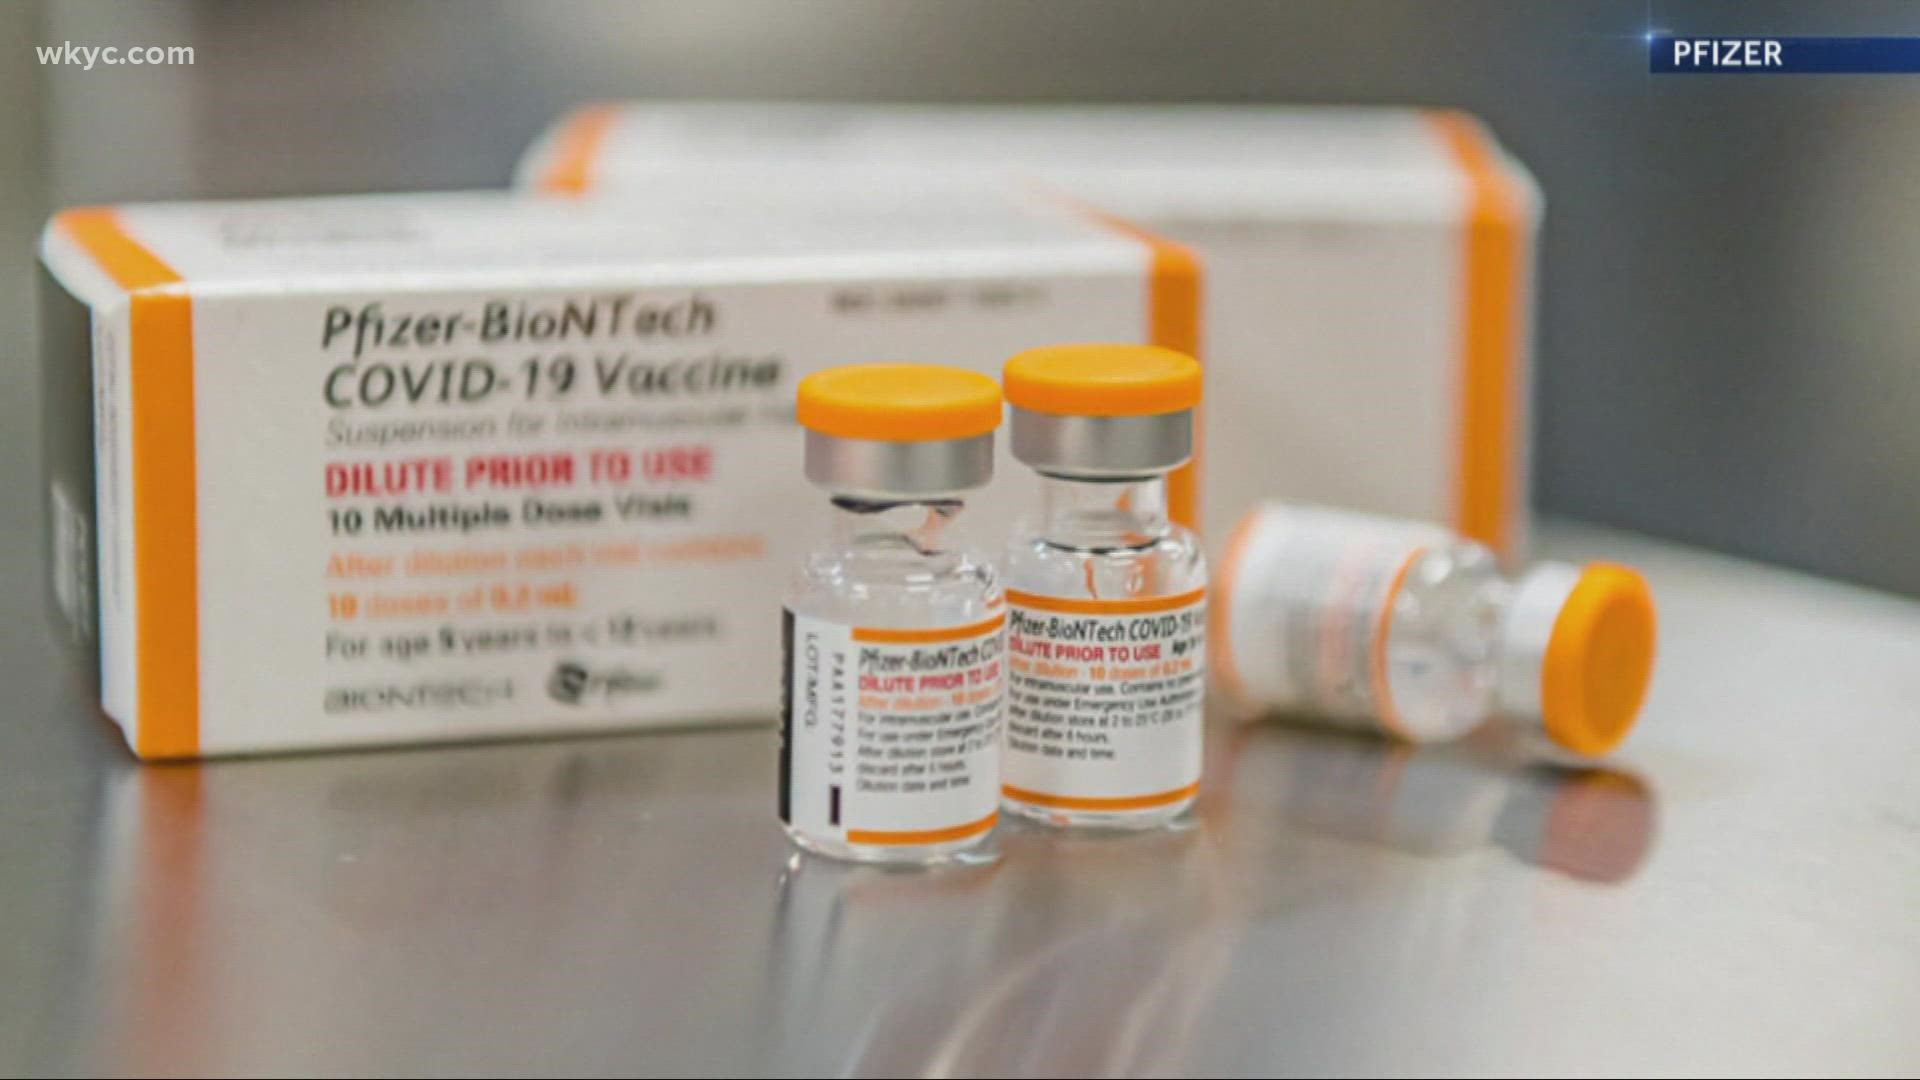 The CDC has signed off on allowing children ages 5-11 to receive a smaller dose of Pfizer's COVID-19 vaccine.